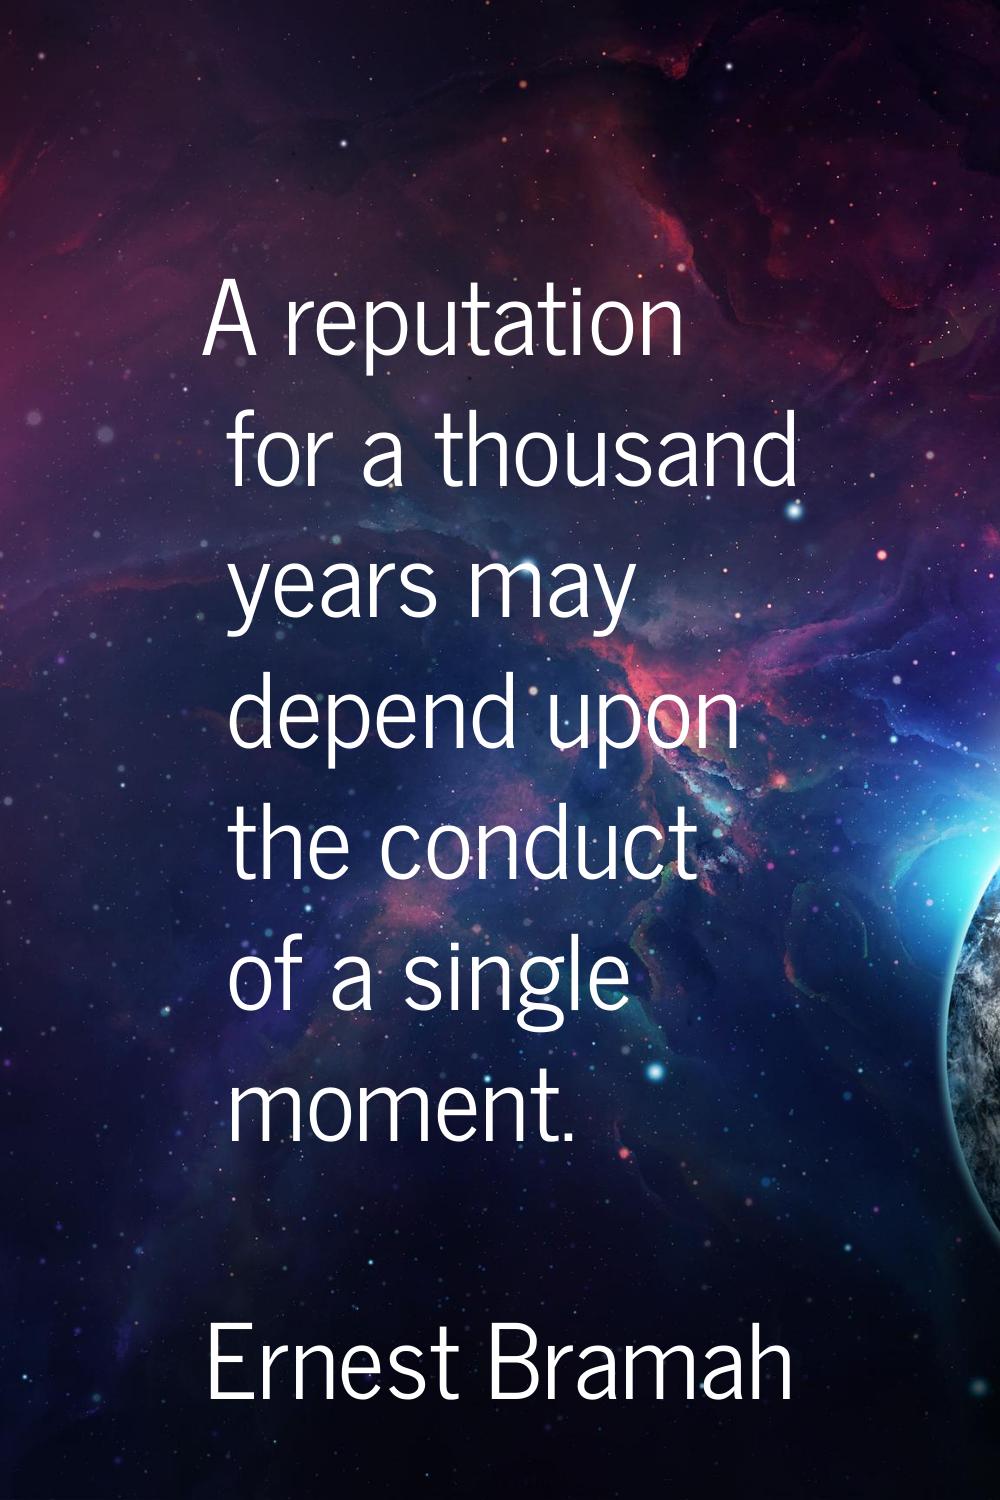 A reputation for a thousand years may depend upon the conduct of a single moment.